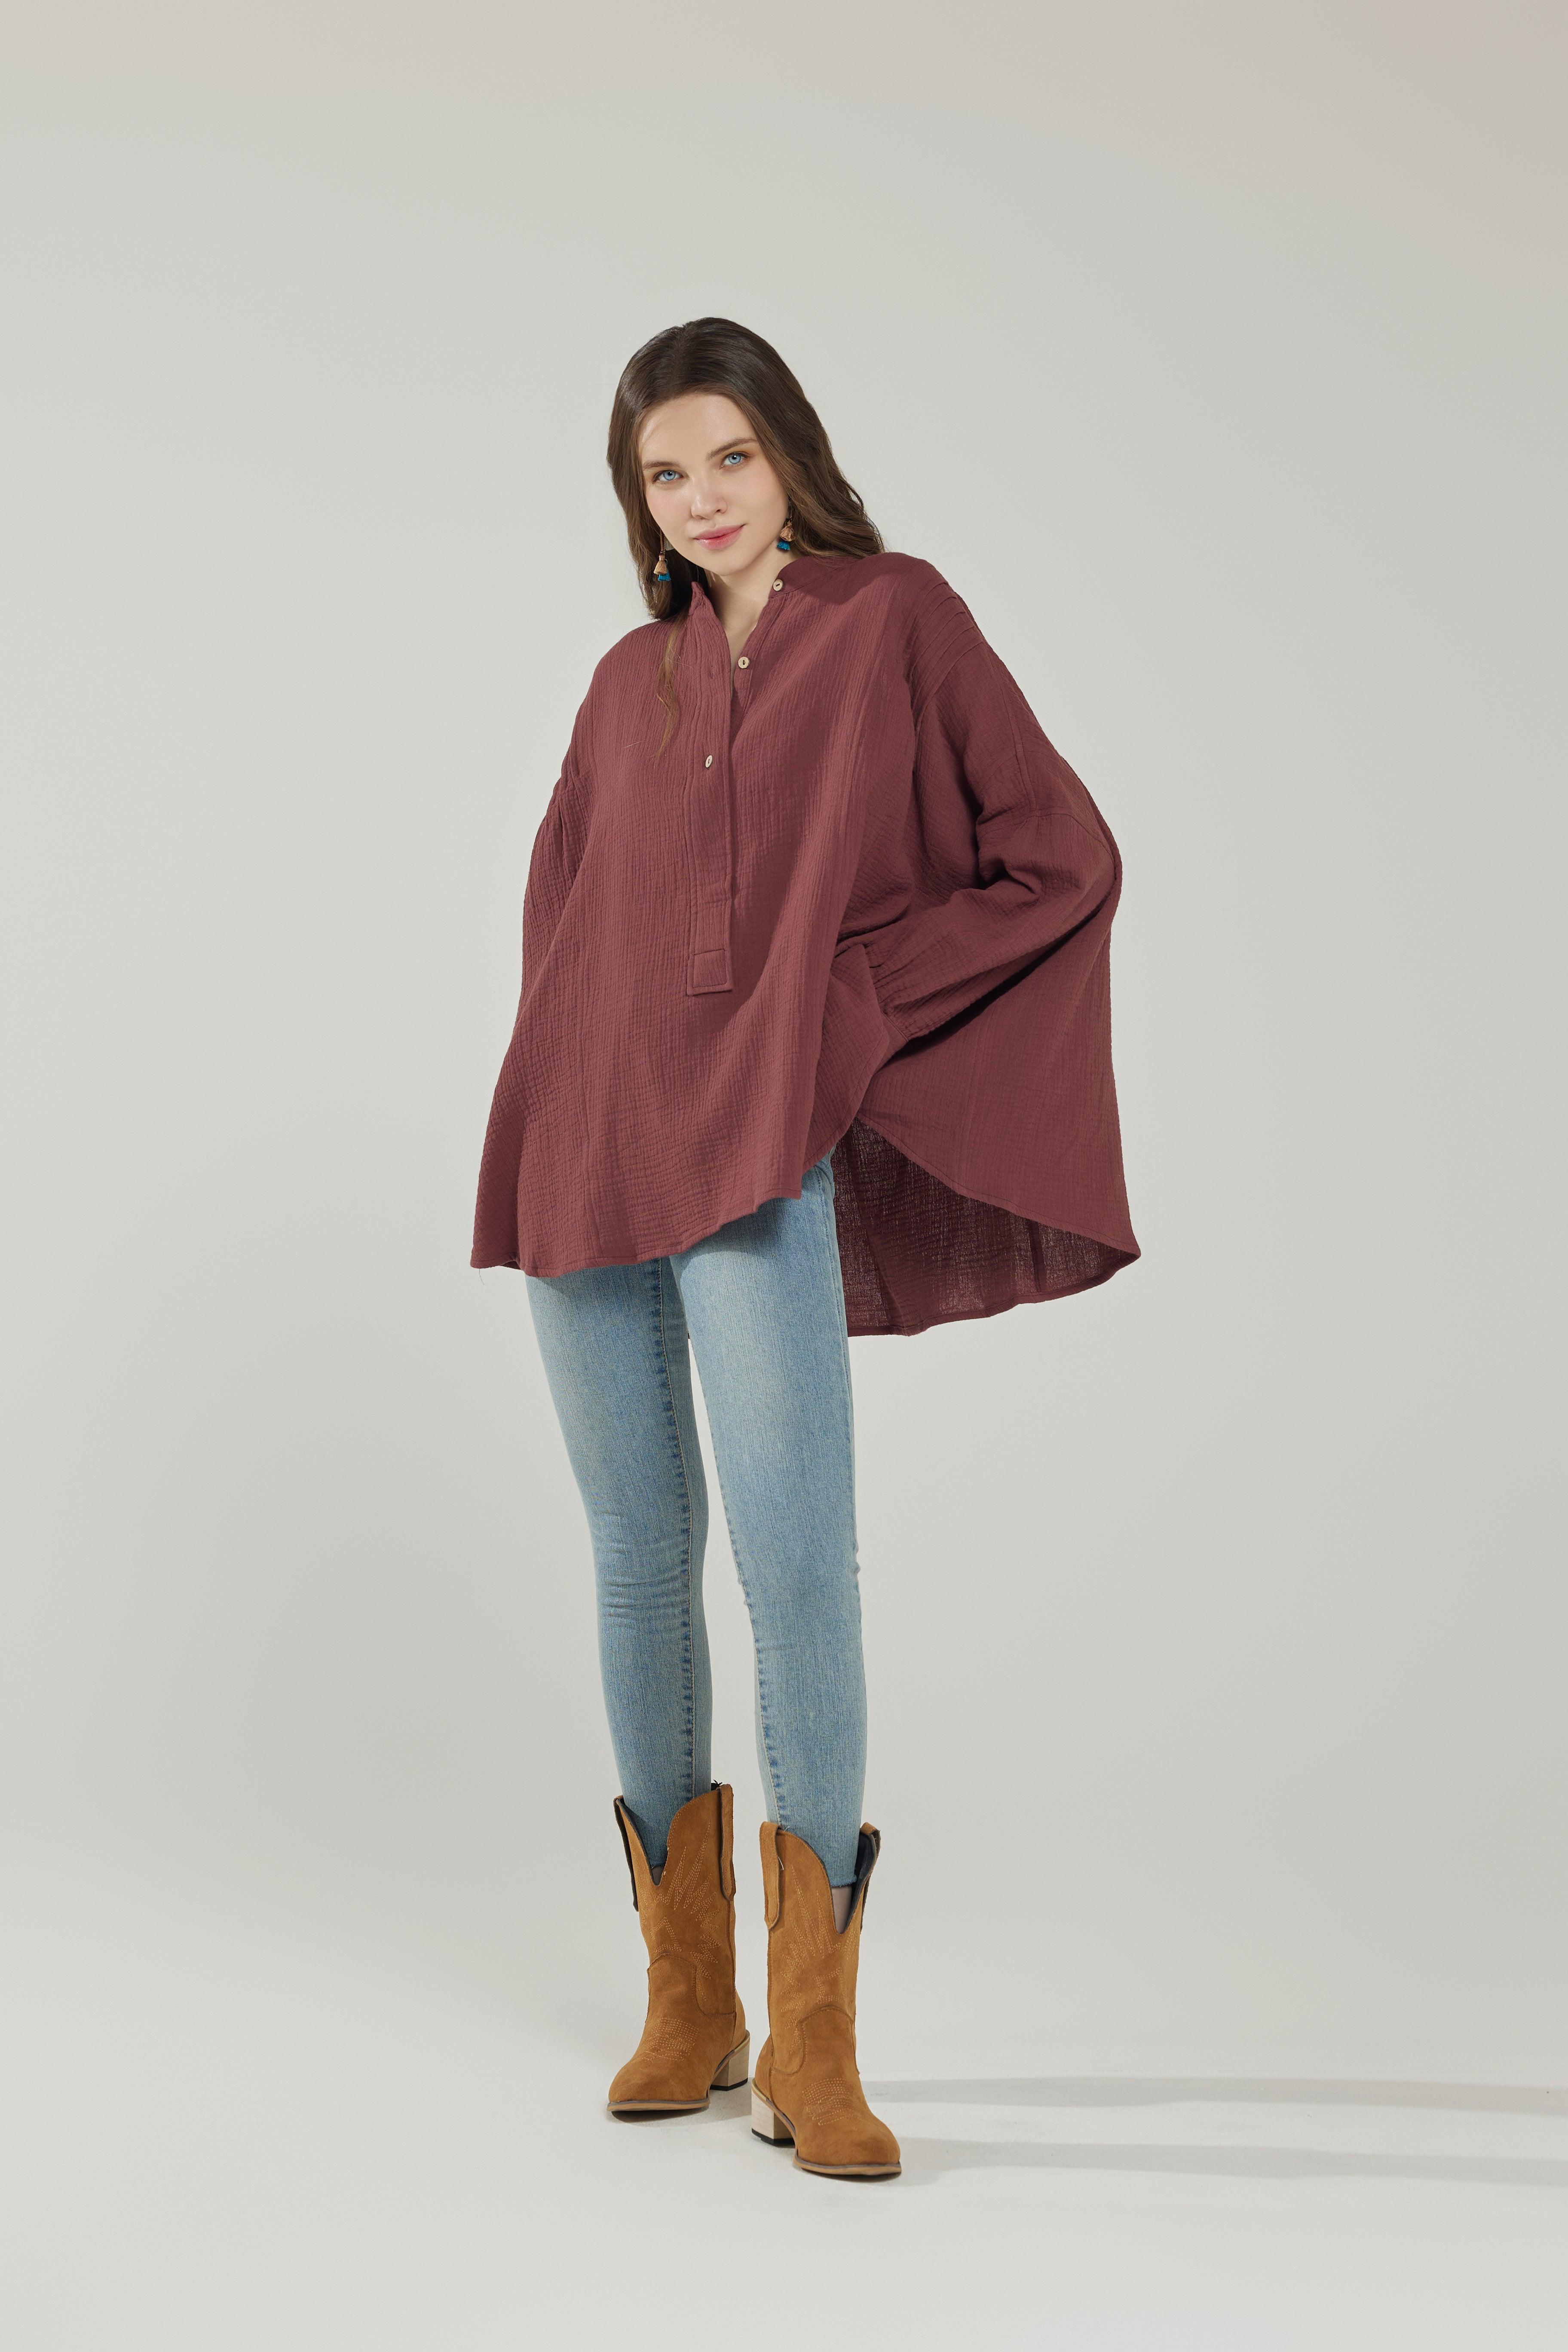 100% Cotton Oversized Pleat detail Ballon sleeve High and low Top - Cacao - noflik